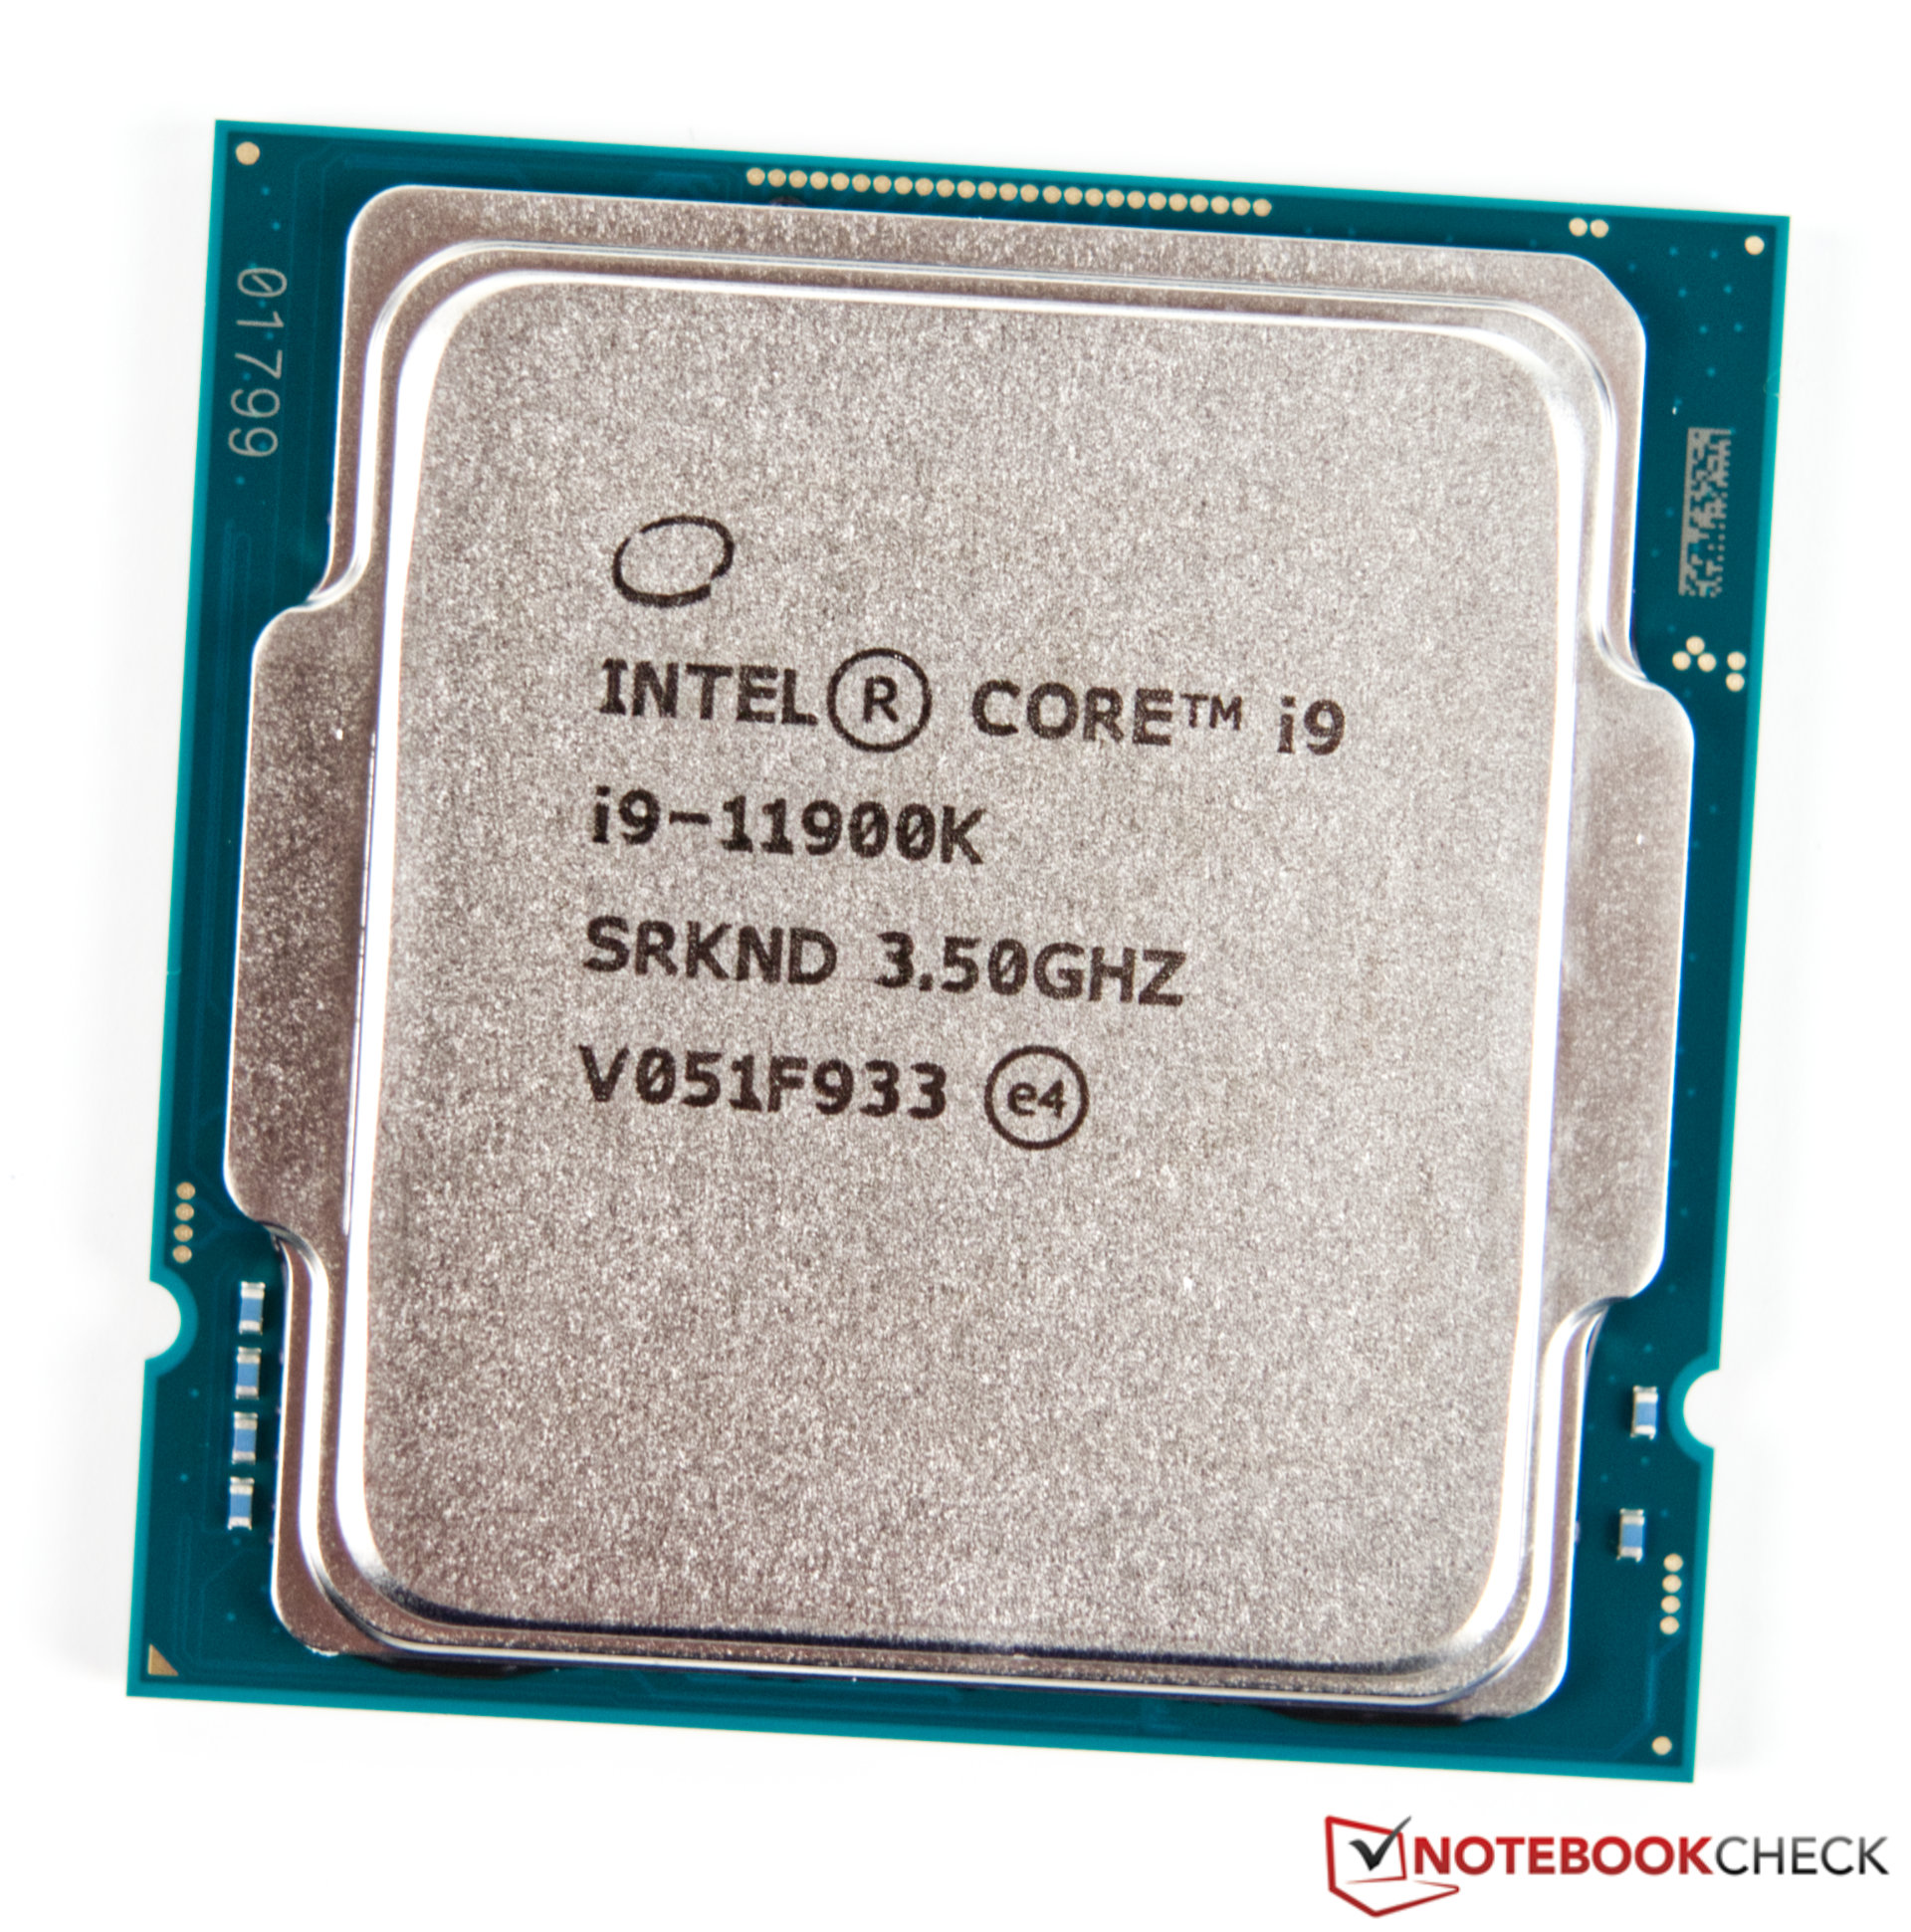 Intel Core i9-10980XE Extreme Edition Review - Introduction